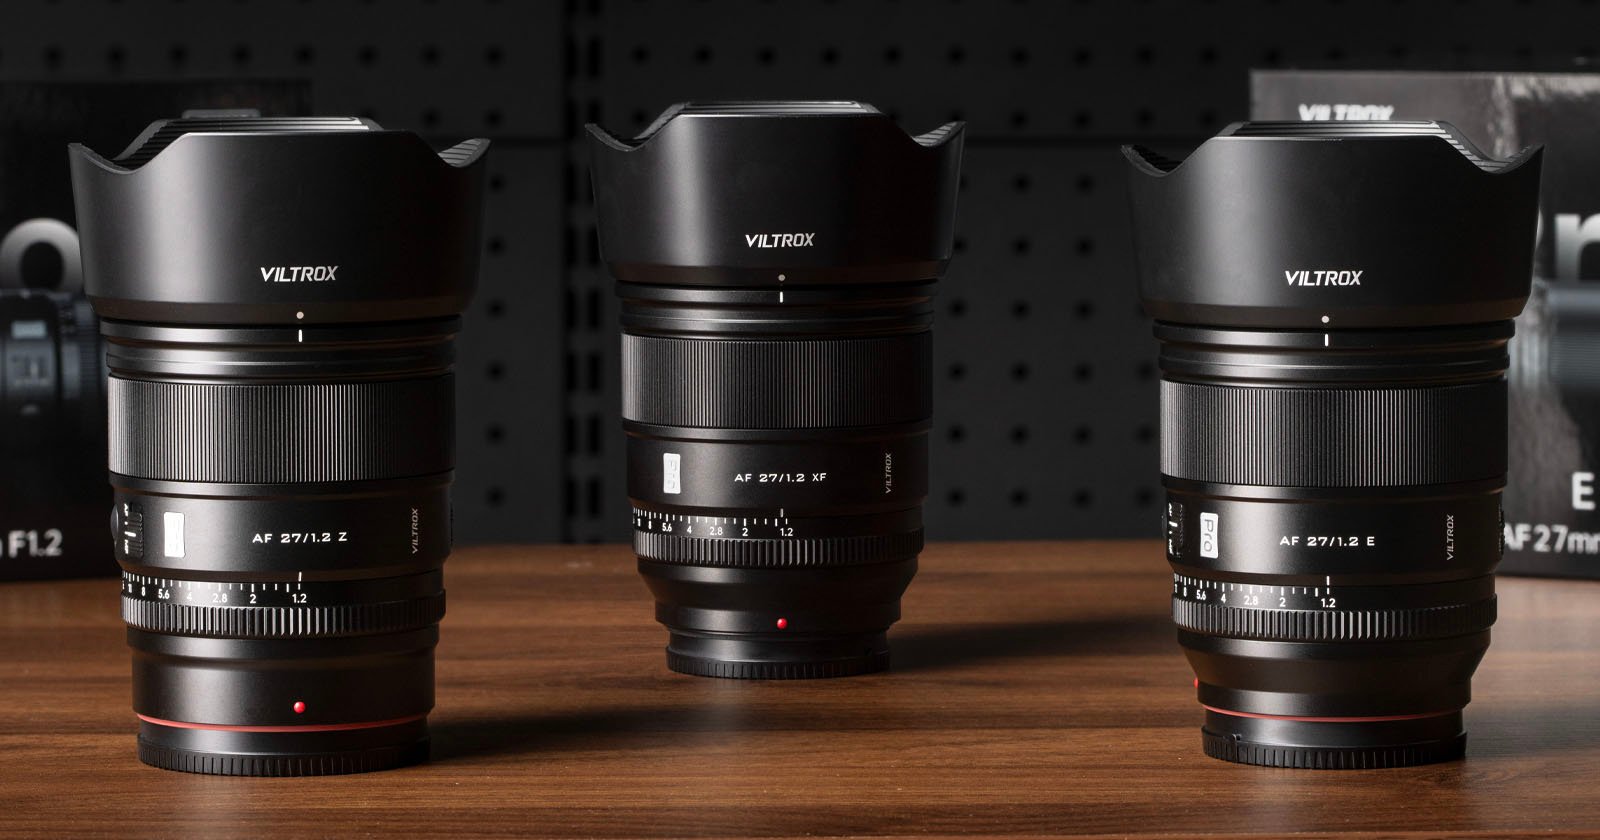 Viltrox’s AF 27mm f/1.2 Pro Lens is Coming to Sony and Nikon APS-C